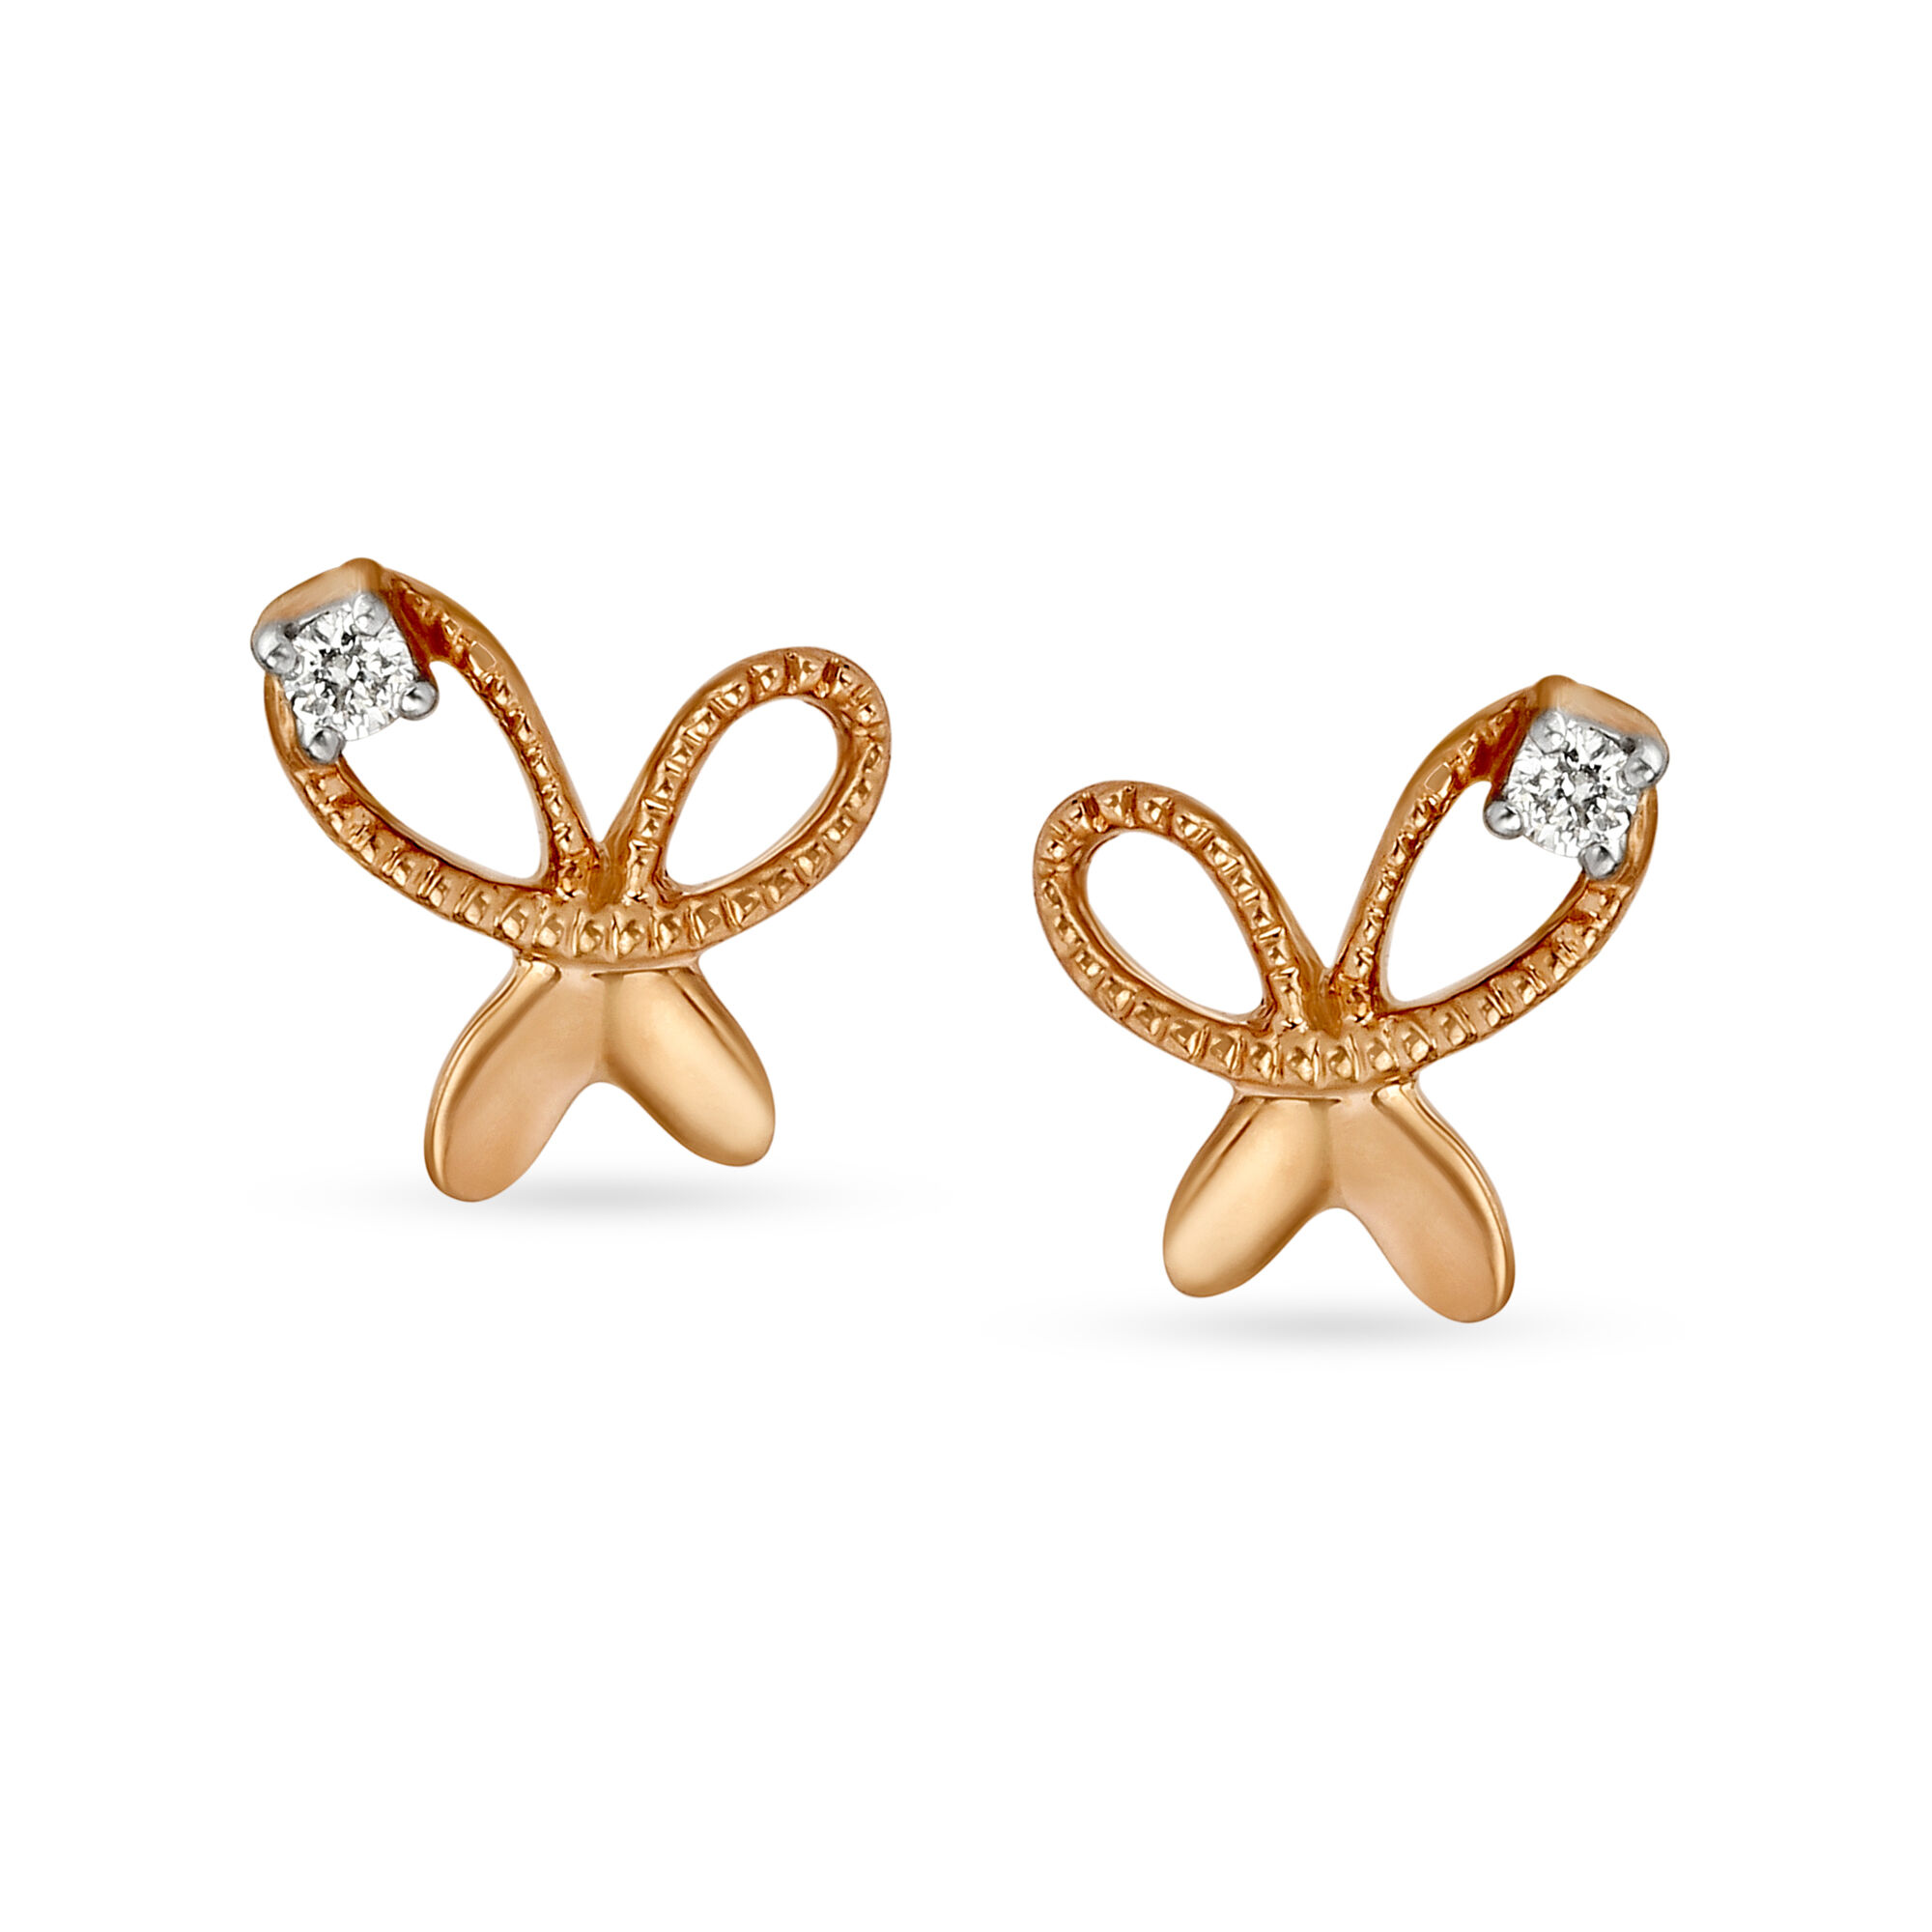 Tanishq Kusuma Ruby Stud Earrings Price Starting From Rs 33,049. Find  Verified Sellers in Sangli - JdMart